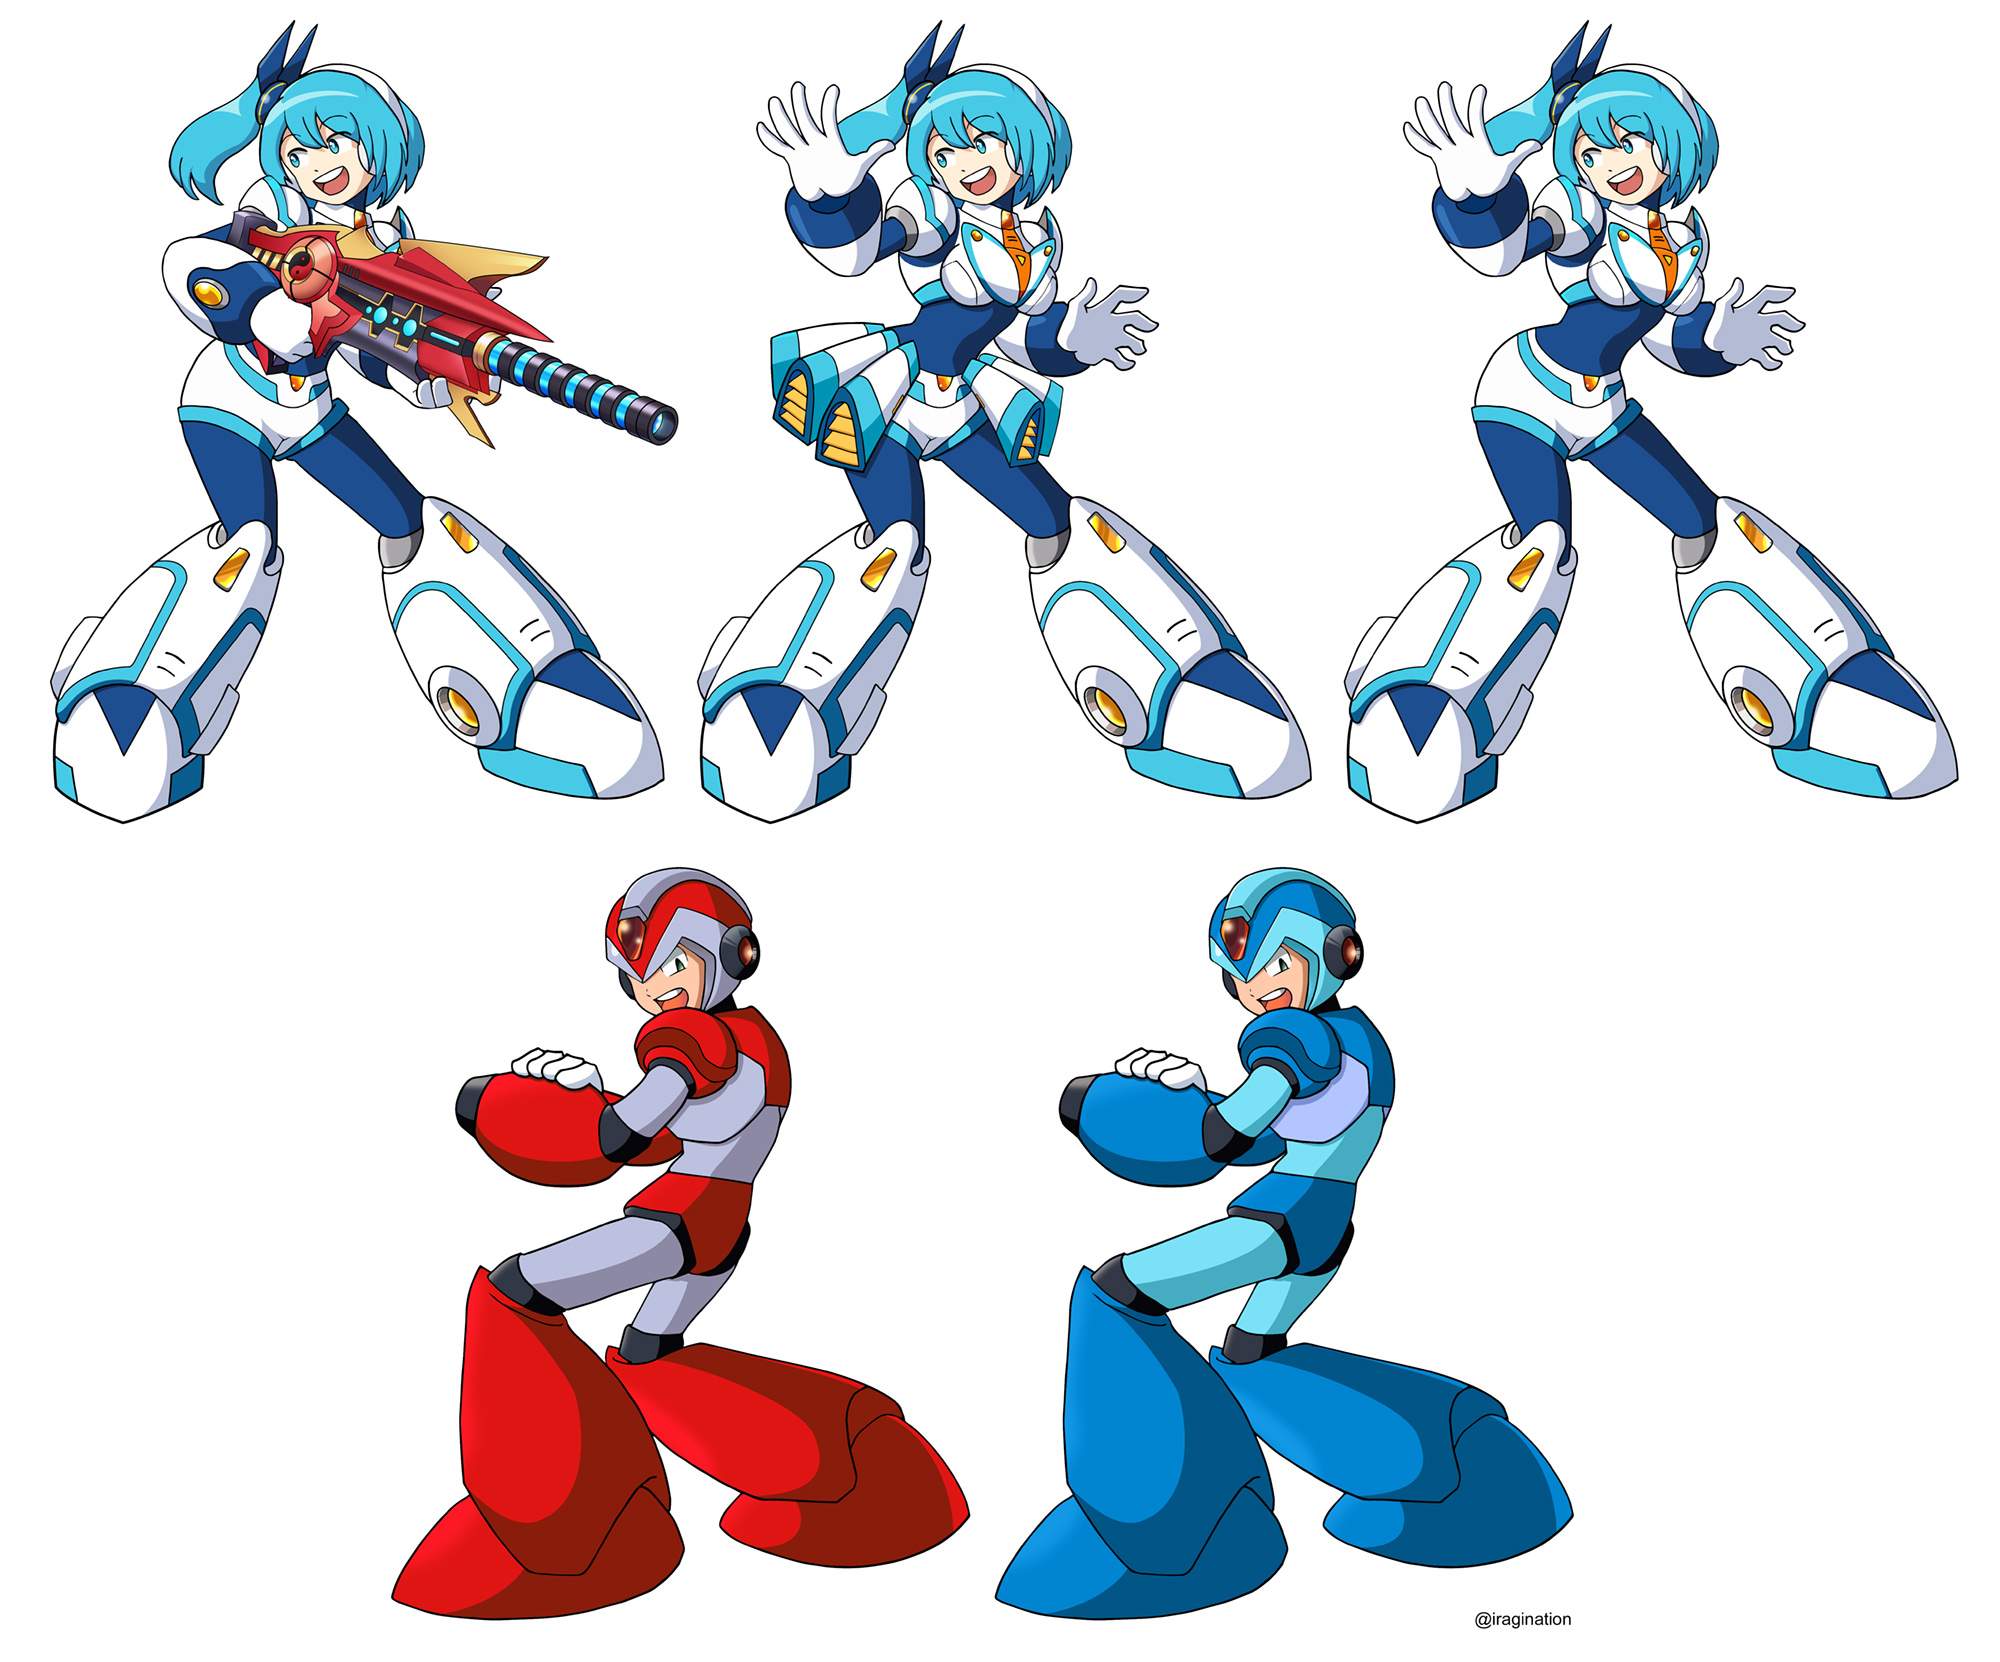 RiCO and X - Color and pose variants - Rockman X DiVE
Here are some alternate versions of RiCO and X I exported from my [url=https://www.iragination.com/illust/displayimage.php?pos=-534]previous post[/url].

I drew RiCO based on the [url=https://www.facebook.com/CAPCOM.RXD/photos/gm.535278447310289/410715786291183/]example[/url] posted by the development team some time ago, where you can switch on and off parts. Since the weapon covers a good deal of her, I guess I did not want you guys to miss how she looked without it.

For X I just used some Photoshop layer effects to create the original and the Rising Fire Ver. color scheme. 

Keywords: rico x